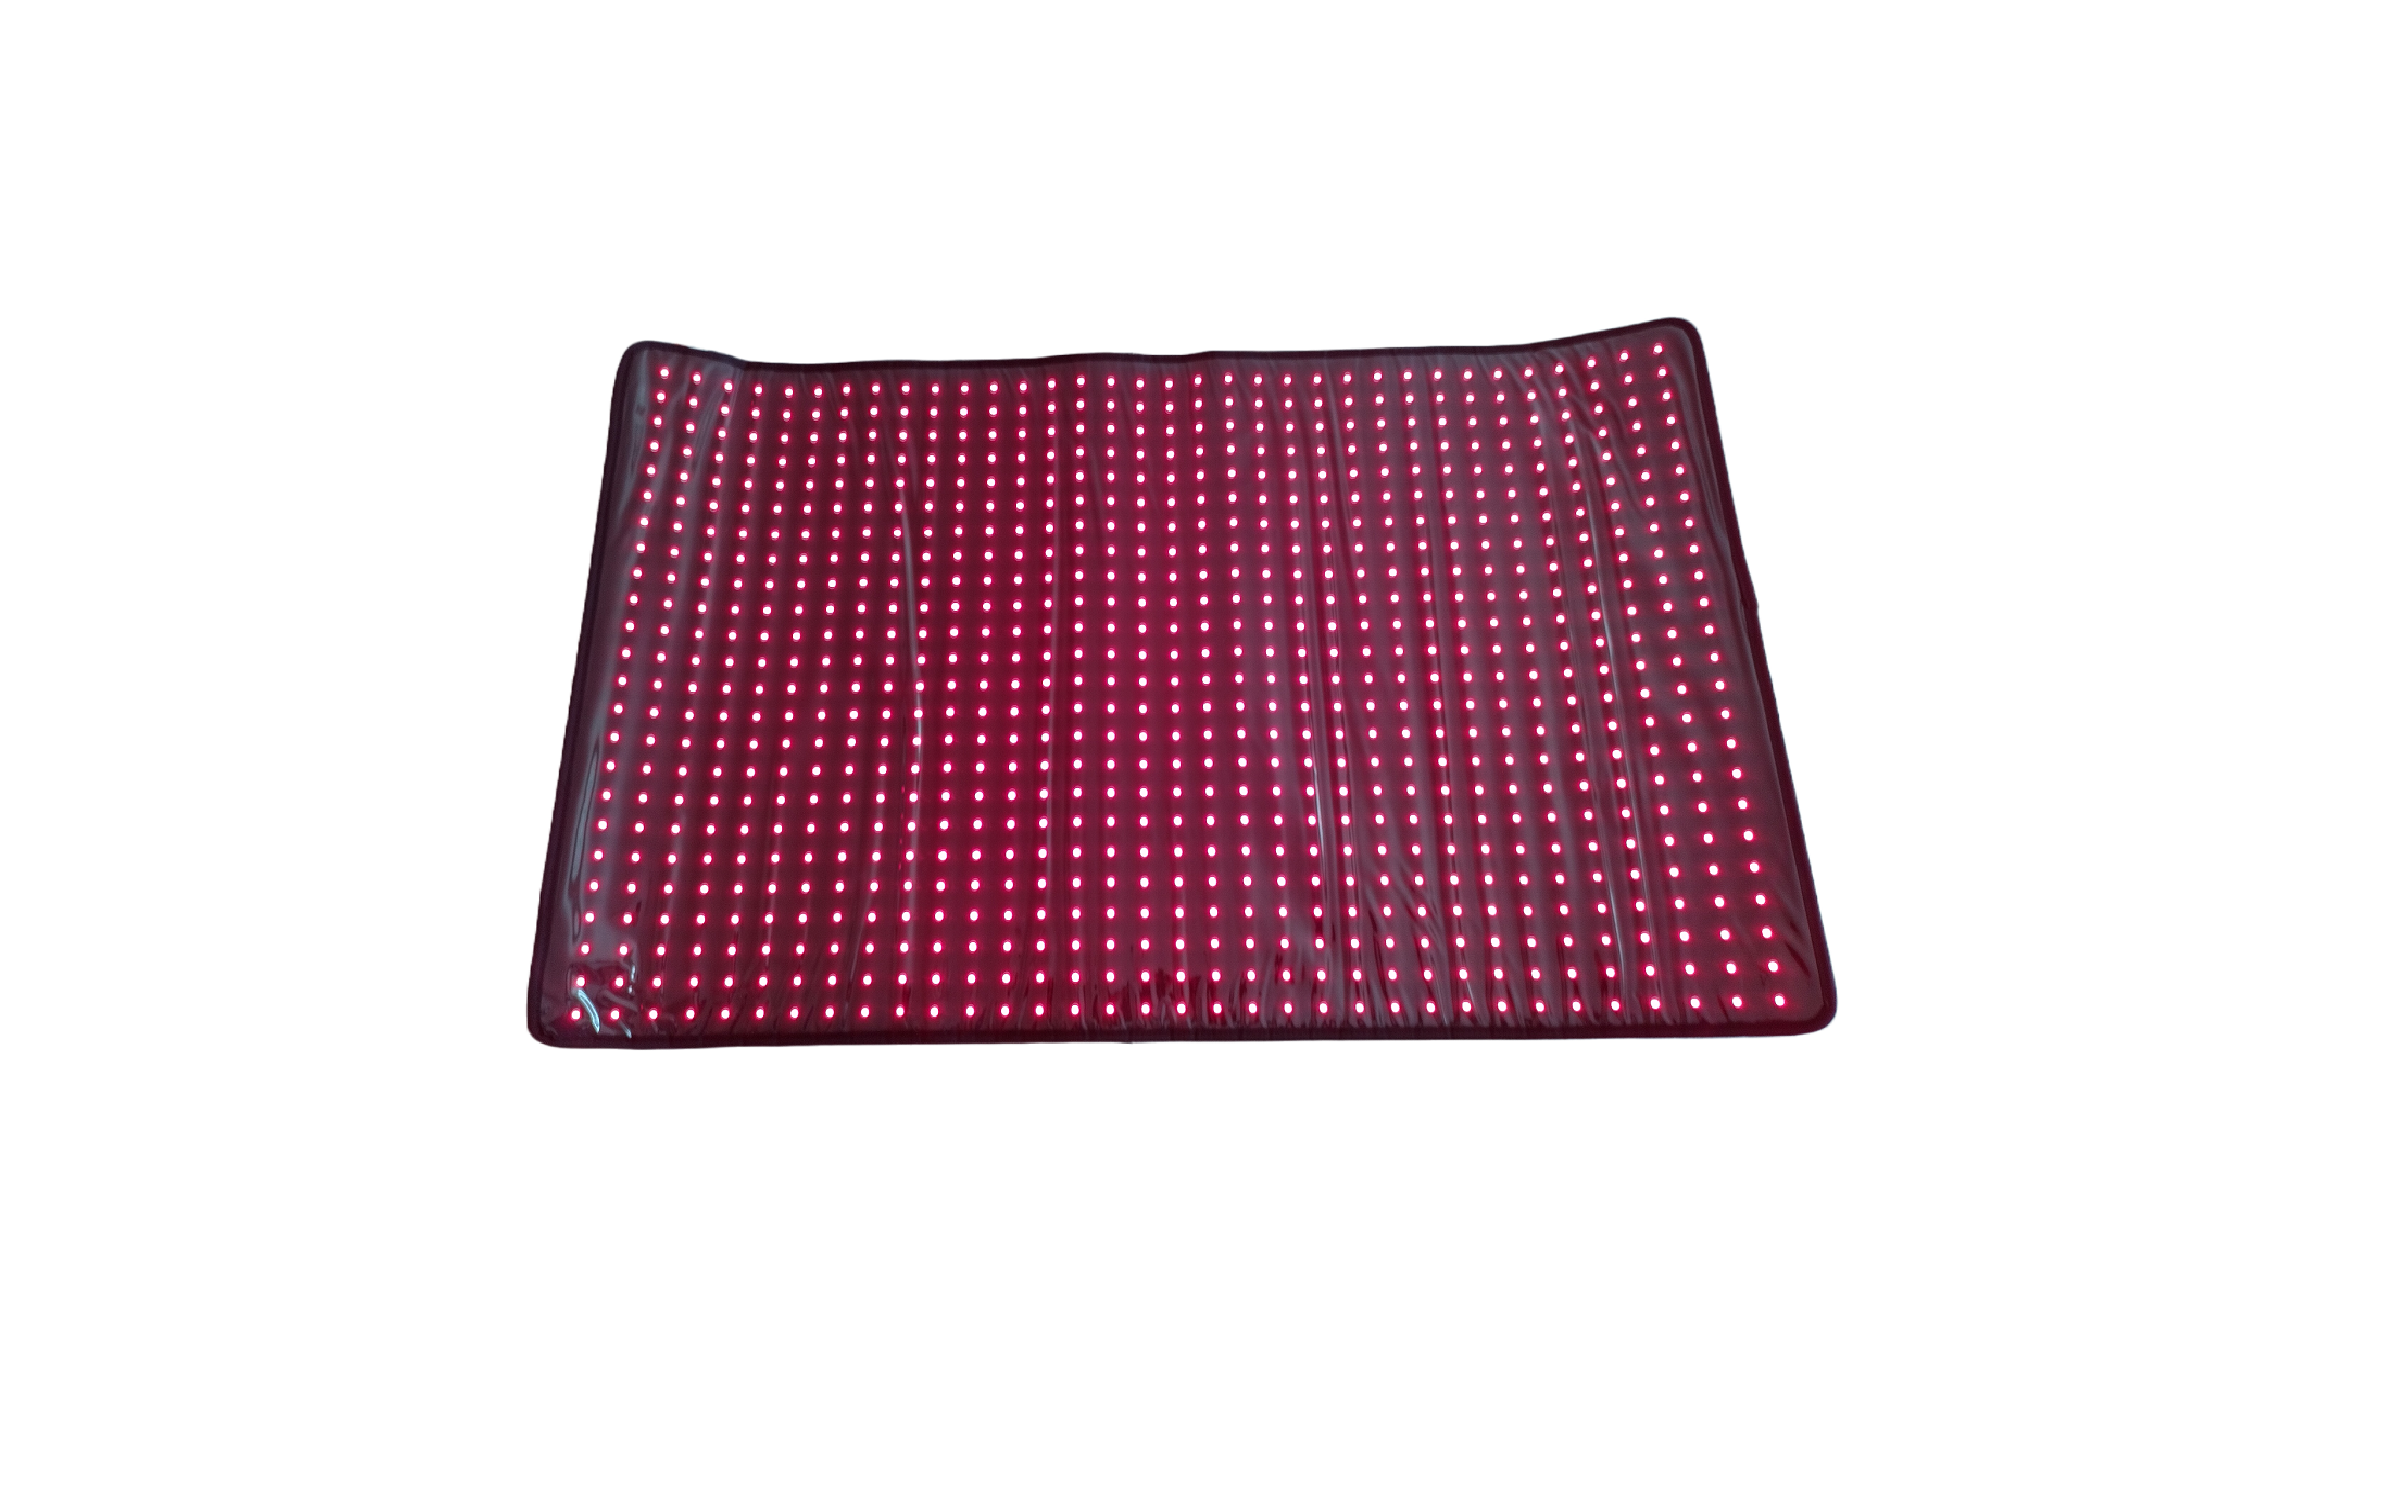 Light therapy flex mat for wound healing, reduction of pain and inflammation